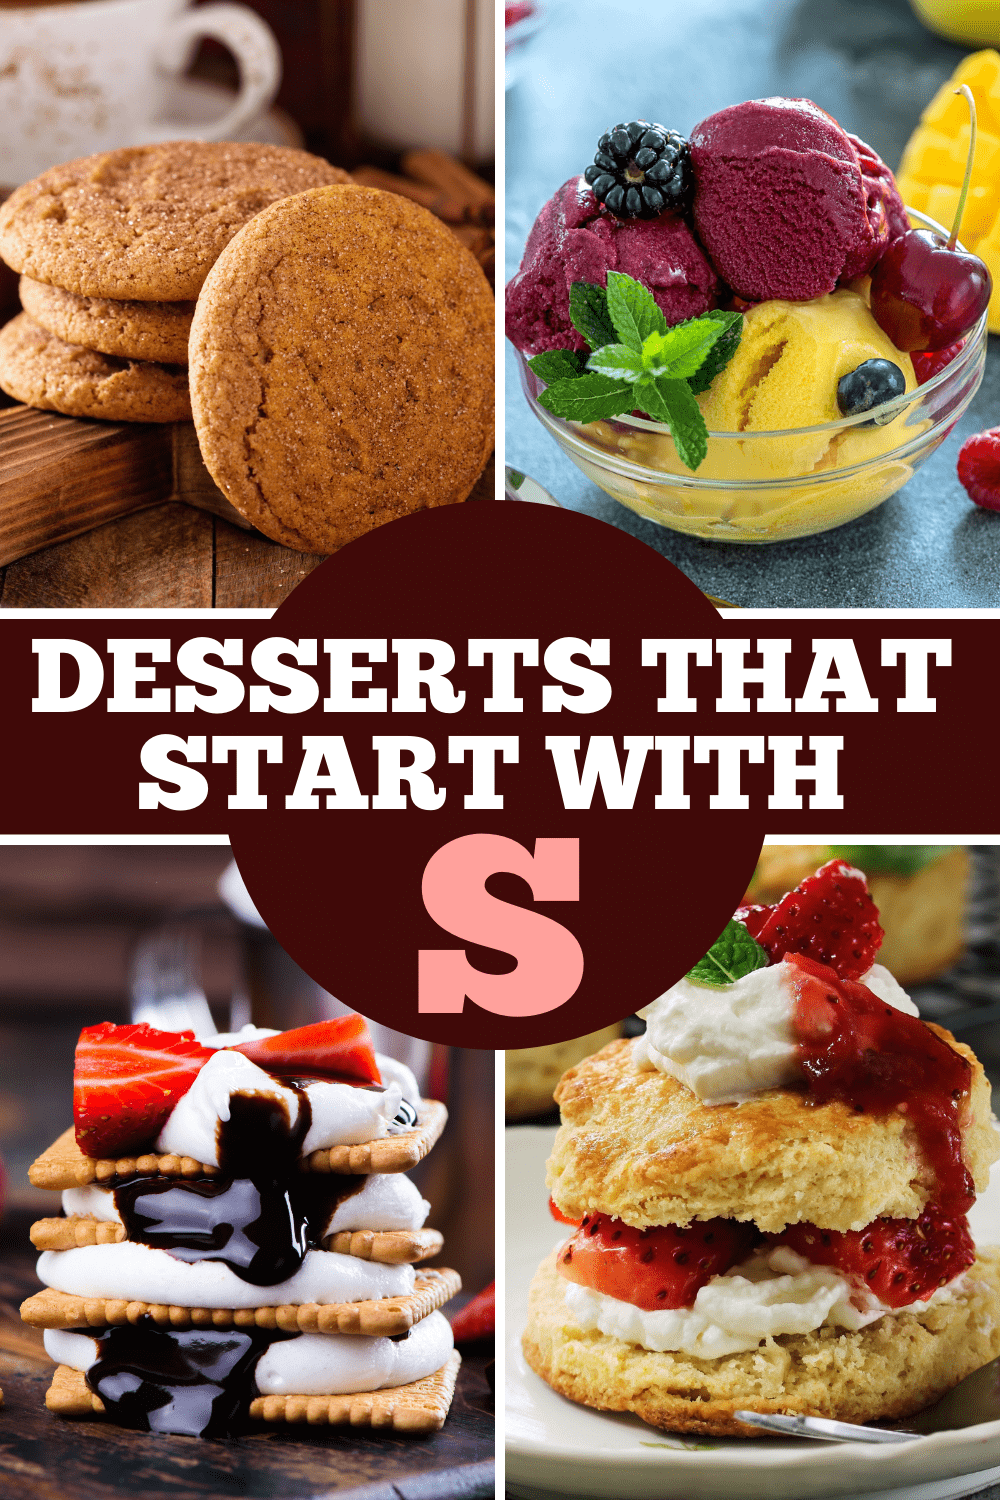 15 Desserts That Start with S - Insanely Good